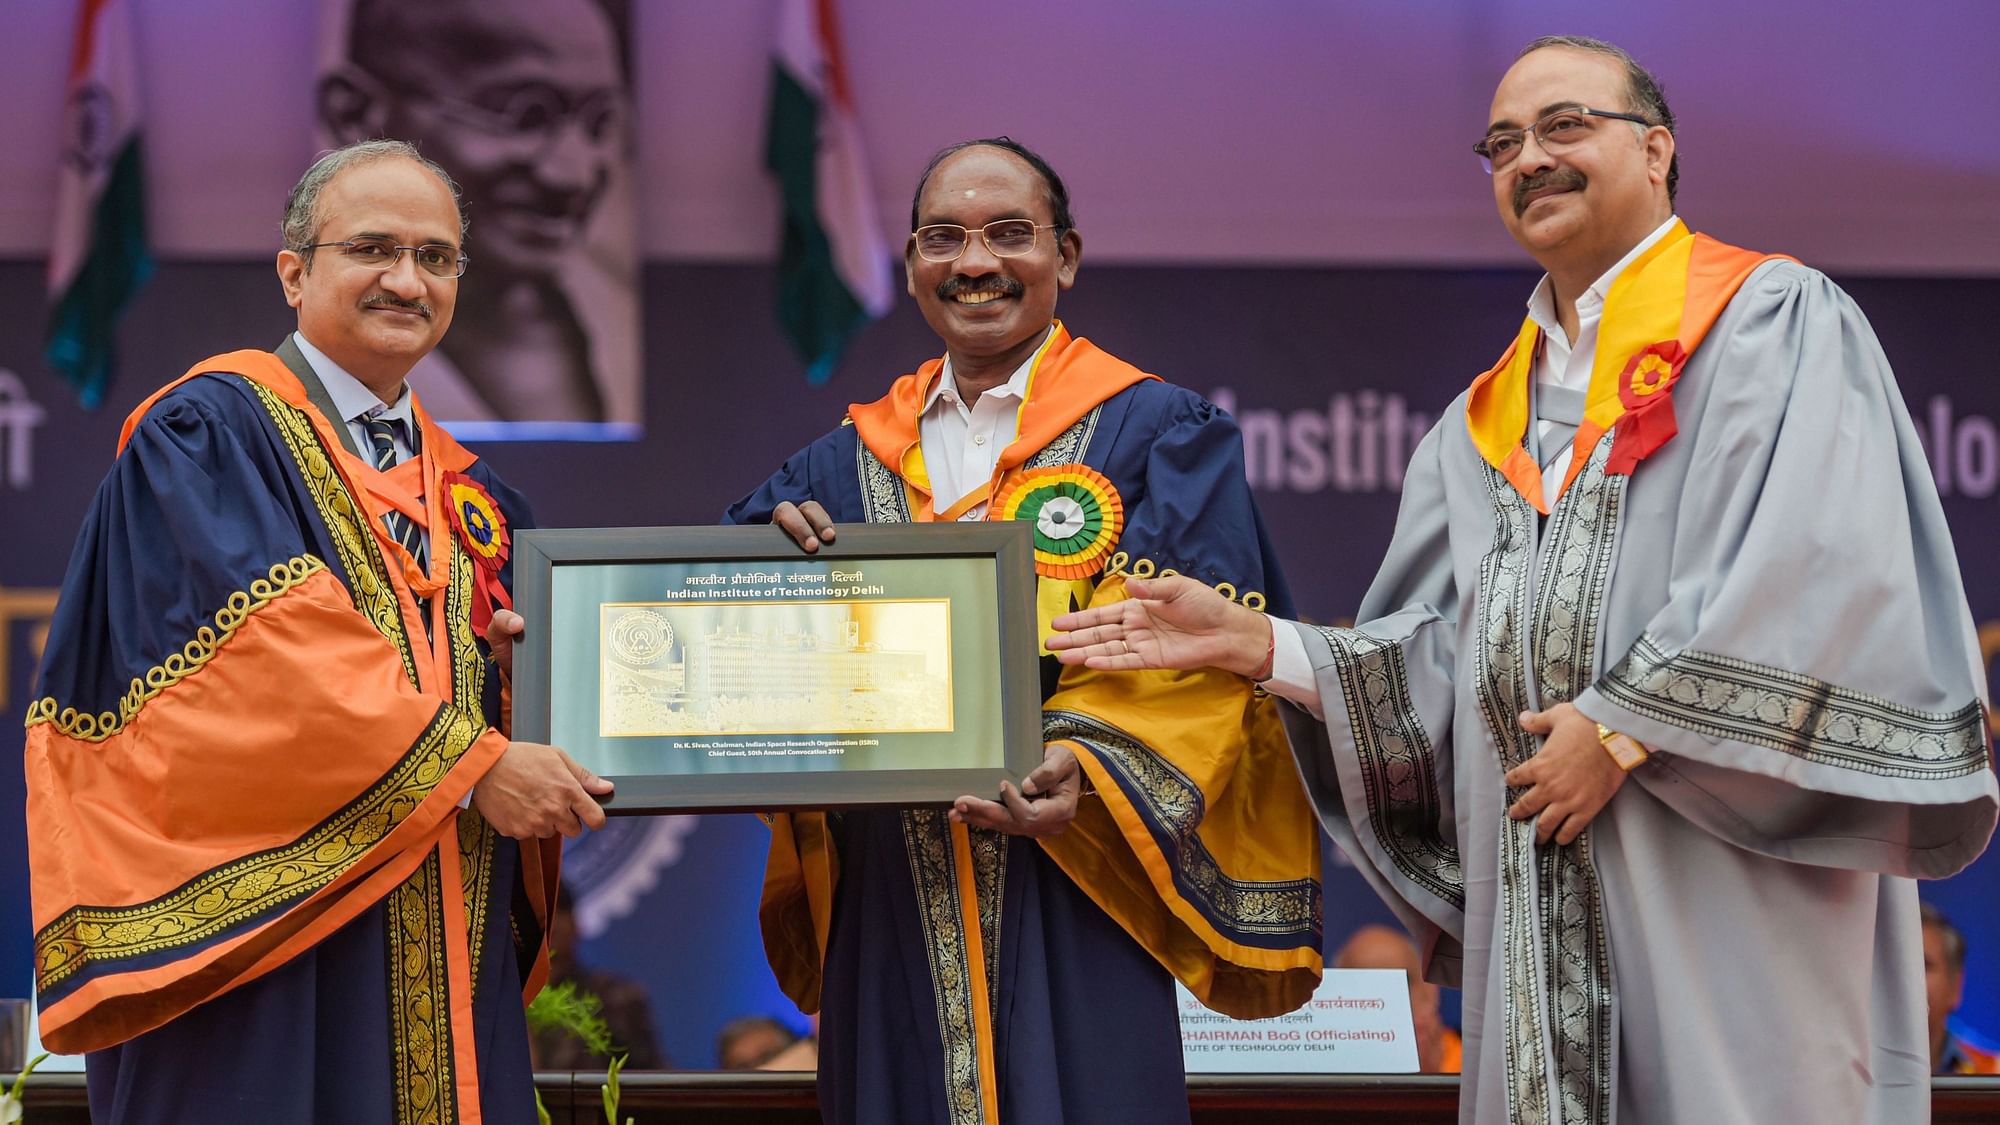  ISRO Chairman K Sivan being presented a memento by Director of IIT, V Ramgopal Rao, during the 50th Annual Convocation of IIT Delhi on  Saturday, 2 November.&nbsp;